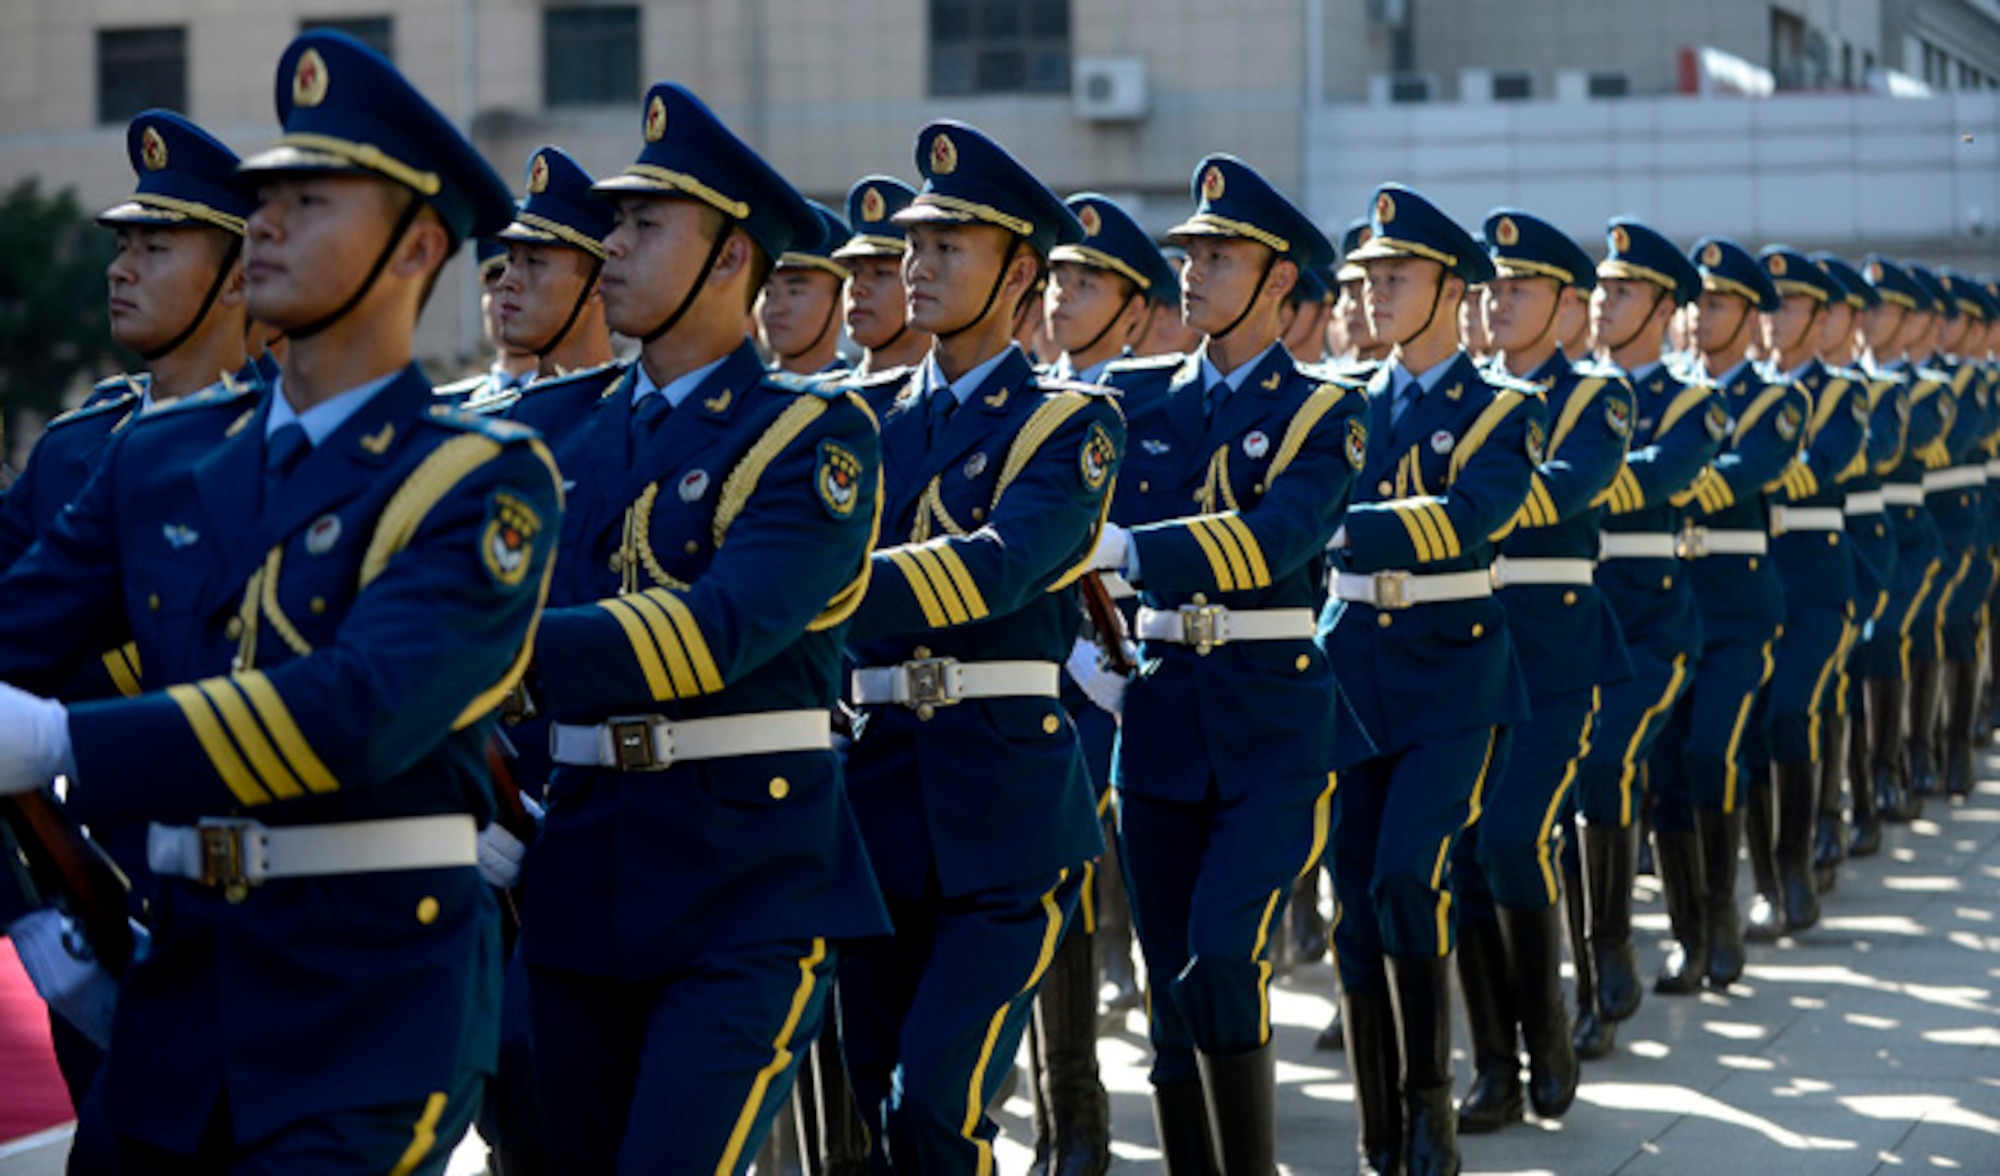 People's Liberation Army Air Force members march during a welcome ceremony in honor of Air Force Chief of Staff Gen. Mark A. Welsh III, hosted by PLAAF Commander Gen. Ma Xiaotian Sept. 25, 2013, in Beijing, China. Welsh, along with Gen. Herbert "Hawk" Carlisle and Chief Master Sgt. of the Air Force James A. Cody will visit with various military leaders as part of a weeklong trip. (U.S. Air Force photo/Scott M. Ash)